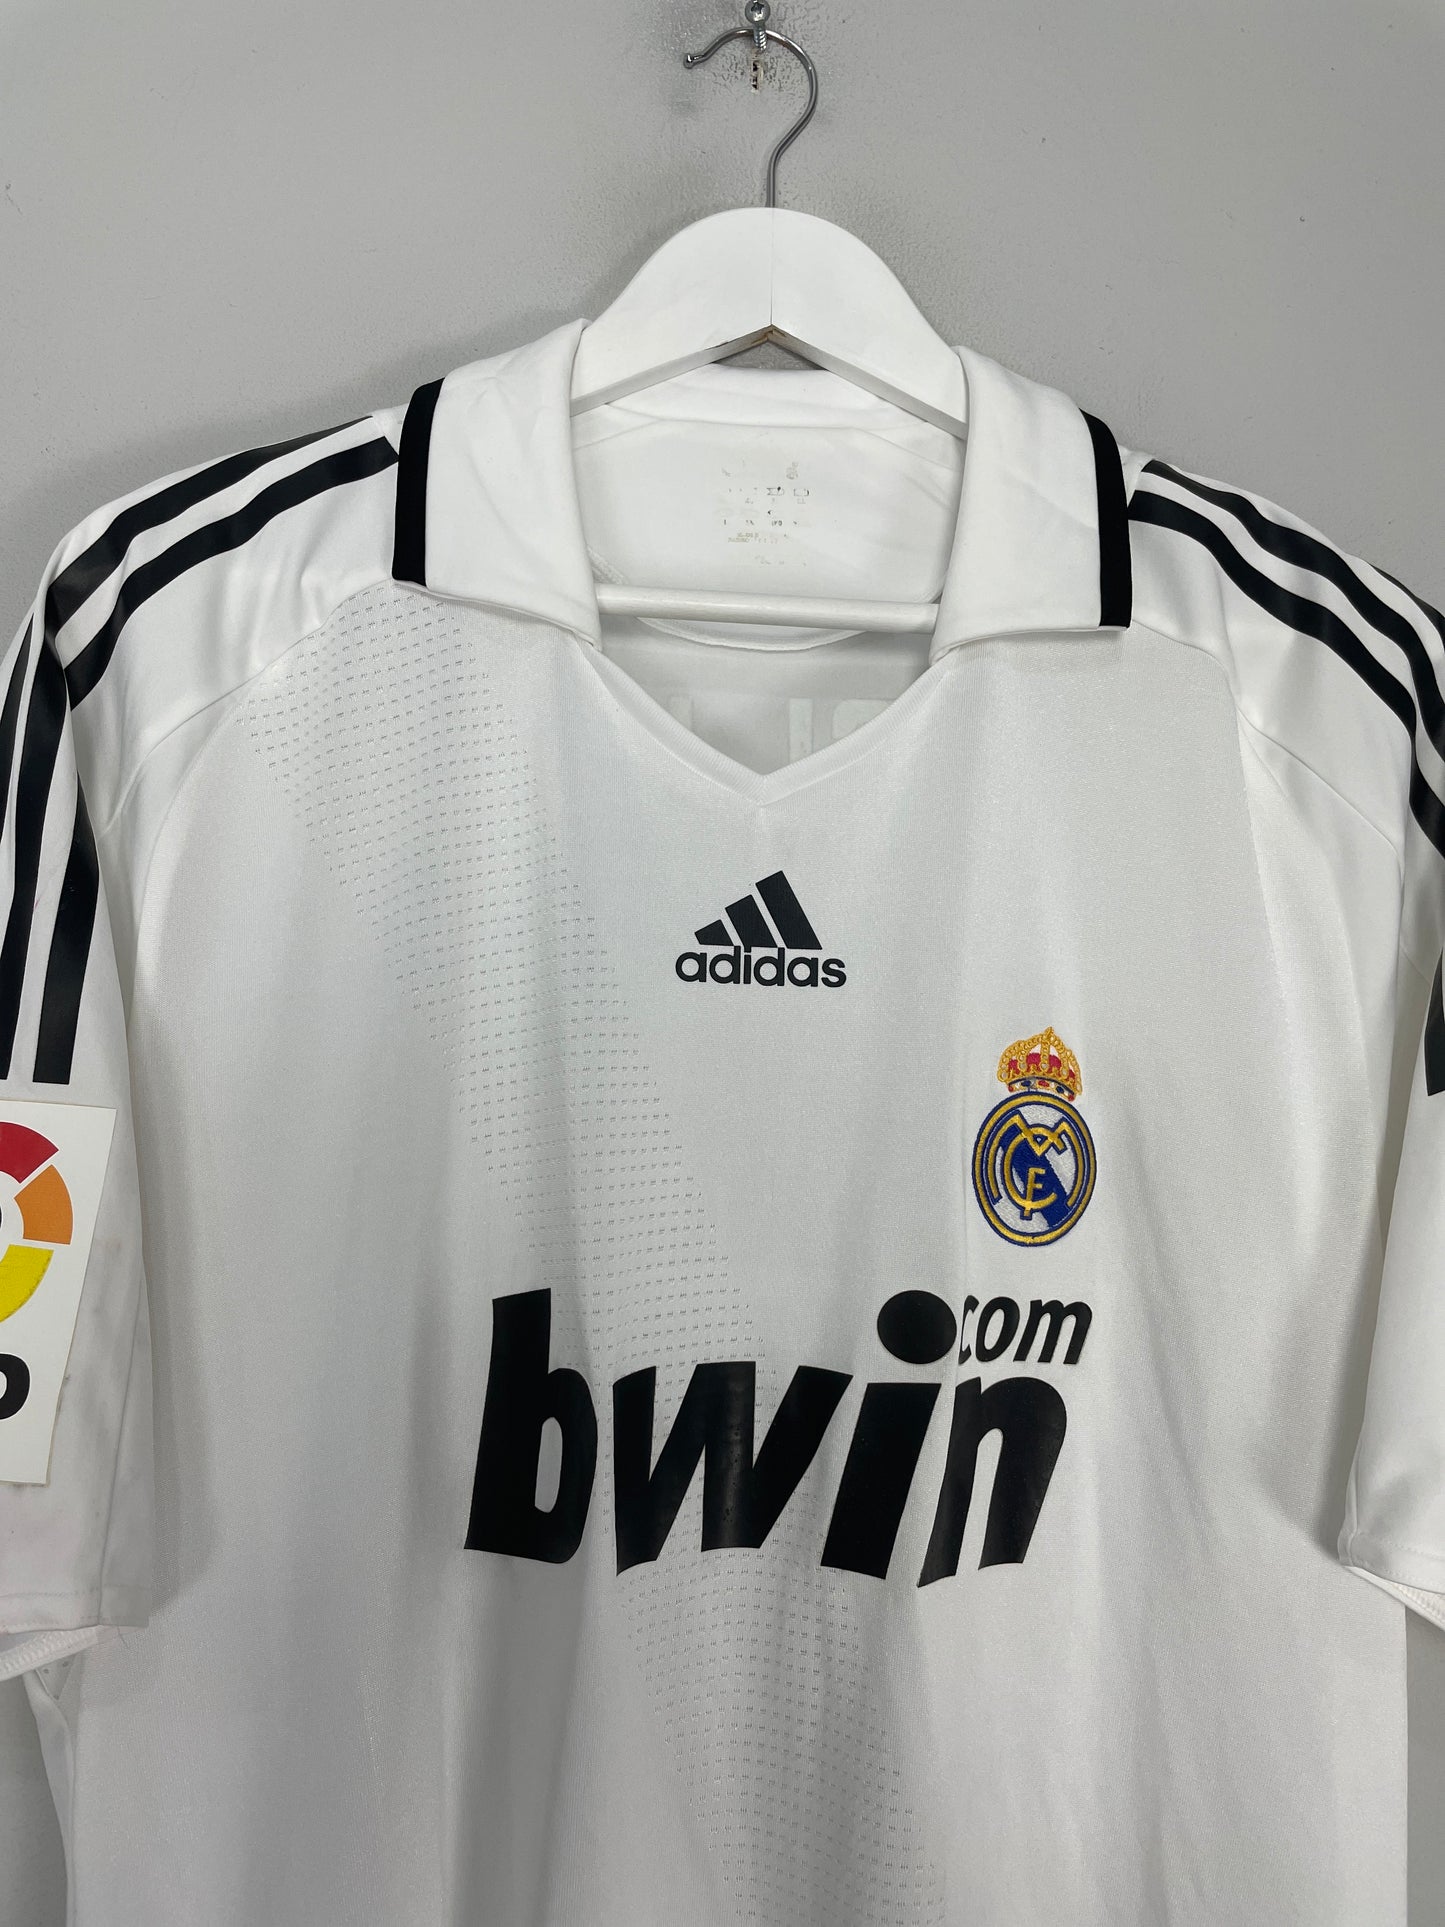 2008/09 REAL MADRID SNEIJDER #10 *PLAYER ISSUE* HOME SHIRT (XL) ADIDAS